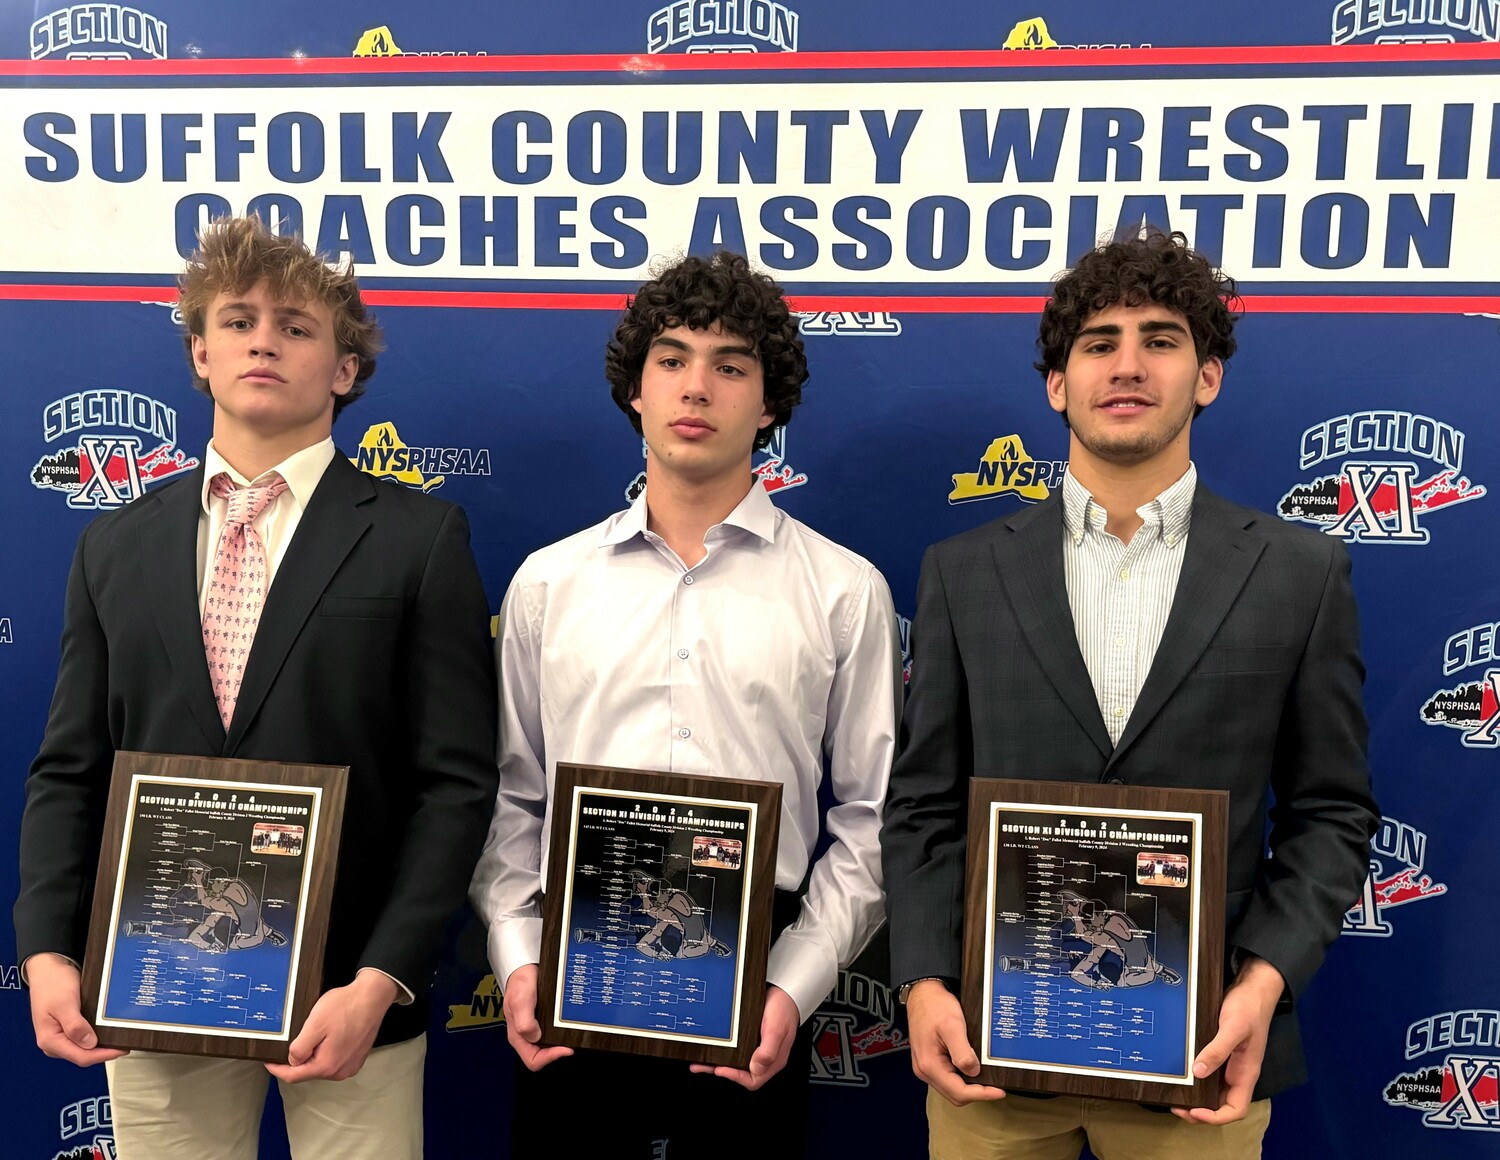 Cole Fox, left, Liam Squires and Jack Nastri at the Suffolk County Wrestling Coaches Association Dinner on April 17. Hudson Fox was not in attendance but was also honored.   ERIC NASTRI